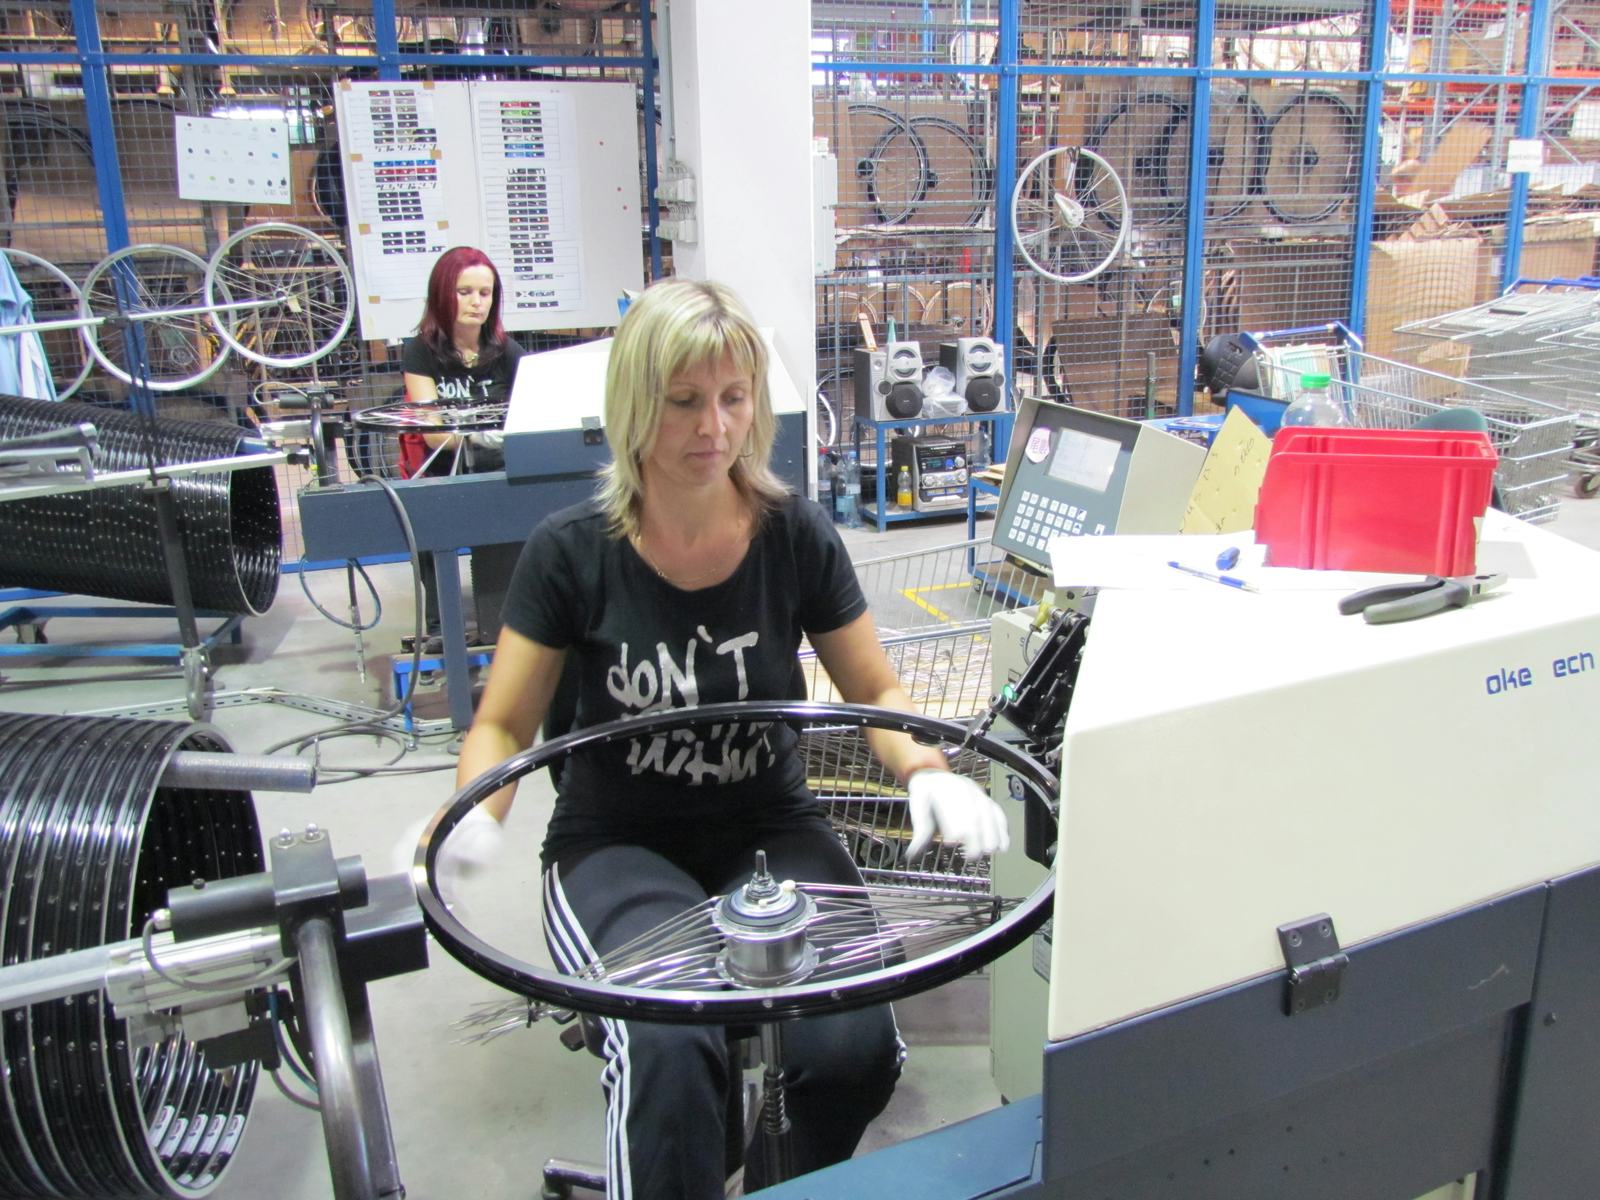 How the European Commission views the bike industry in Europe is all the more interesting given the current re-shoring initiatives that brings parts production back from Asia. - Photo Bike Europe